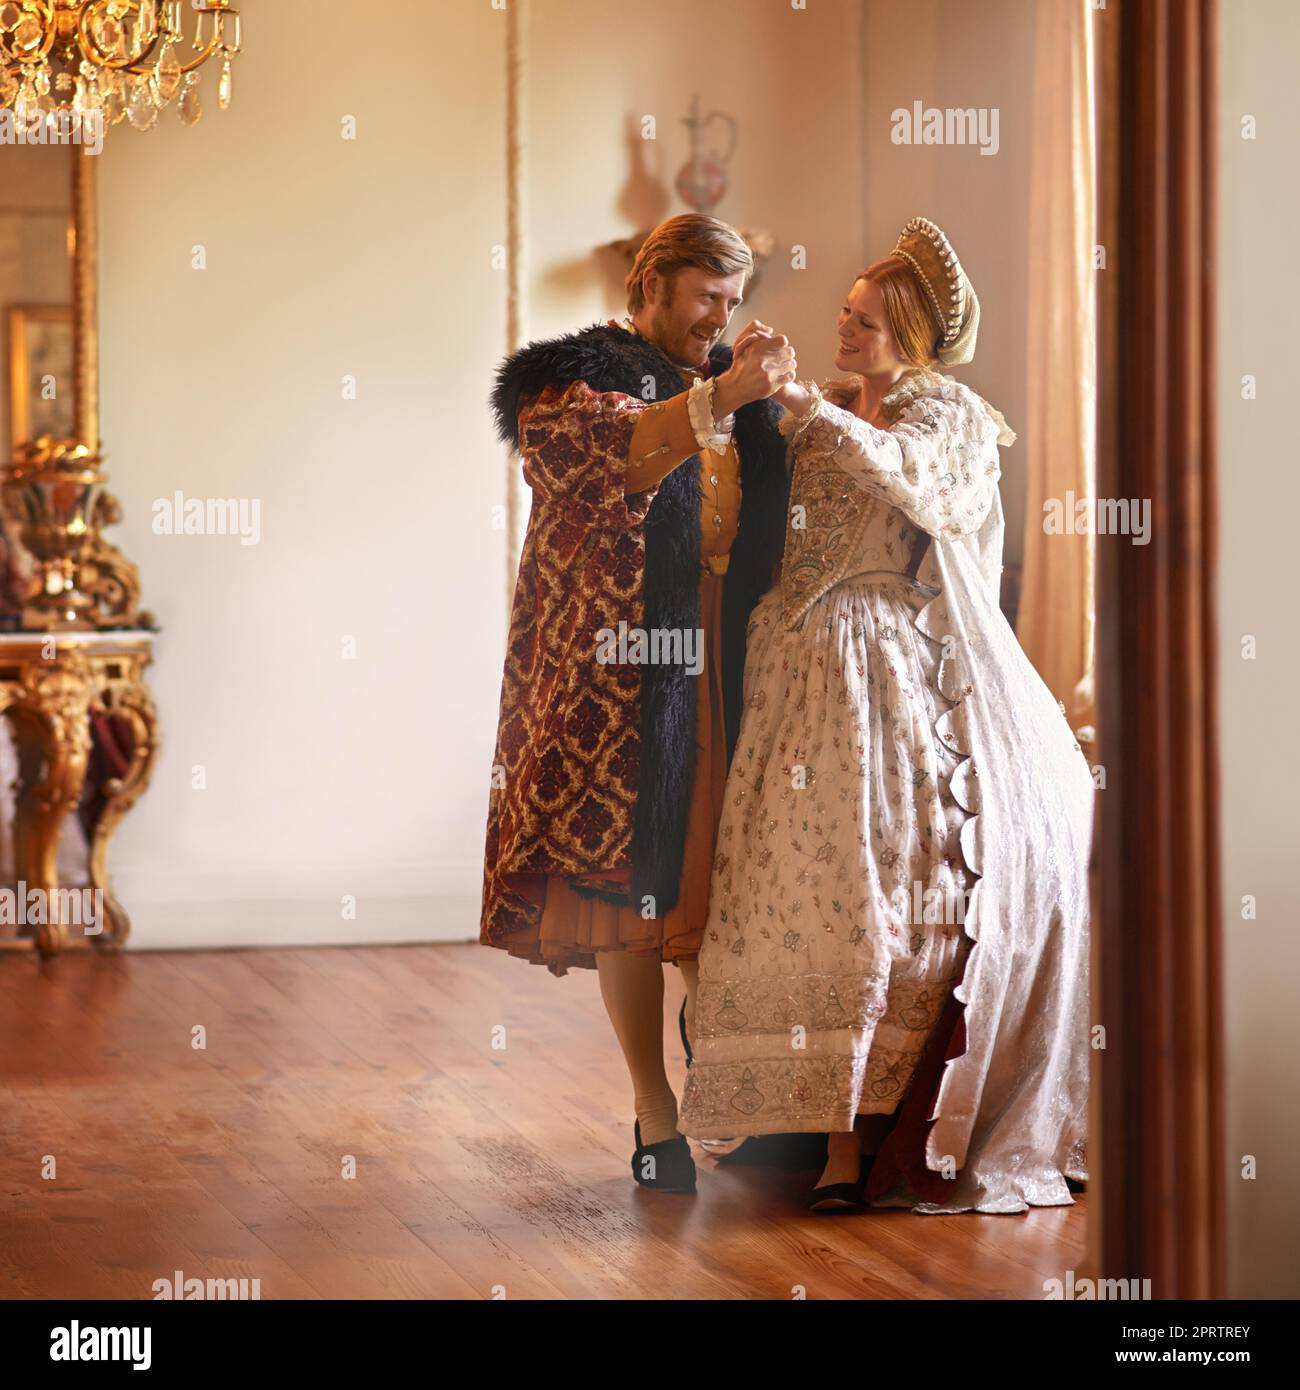 A waltz among royalty. A king and queen dancing together in their palace. Stock Photo